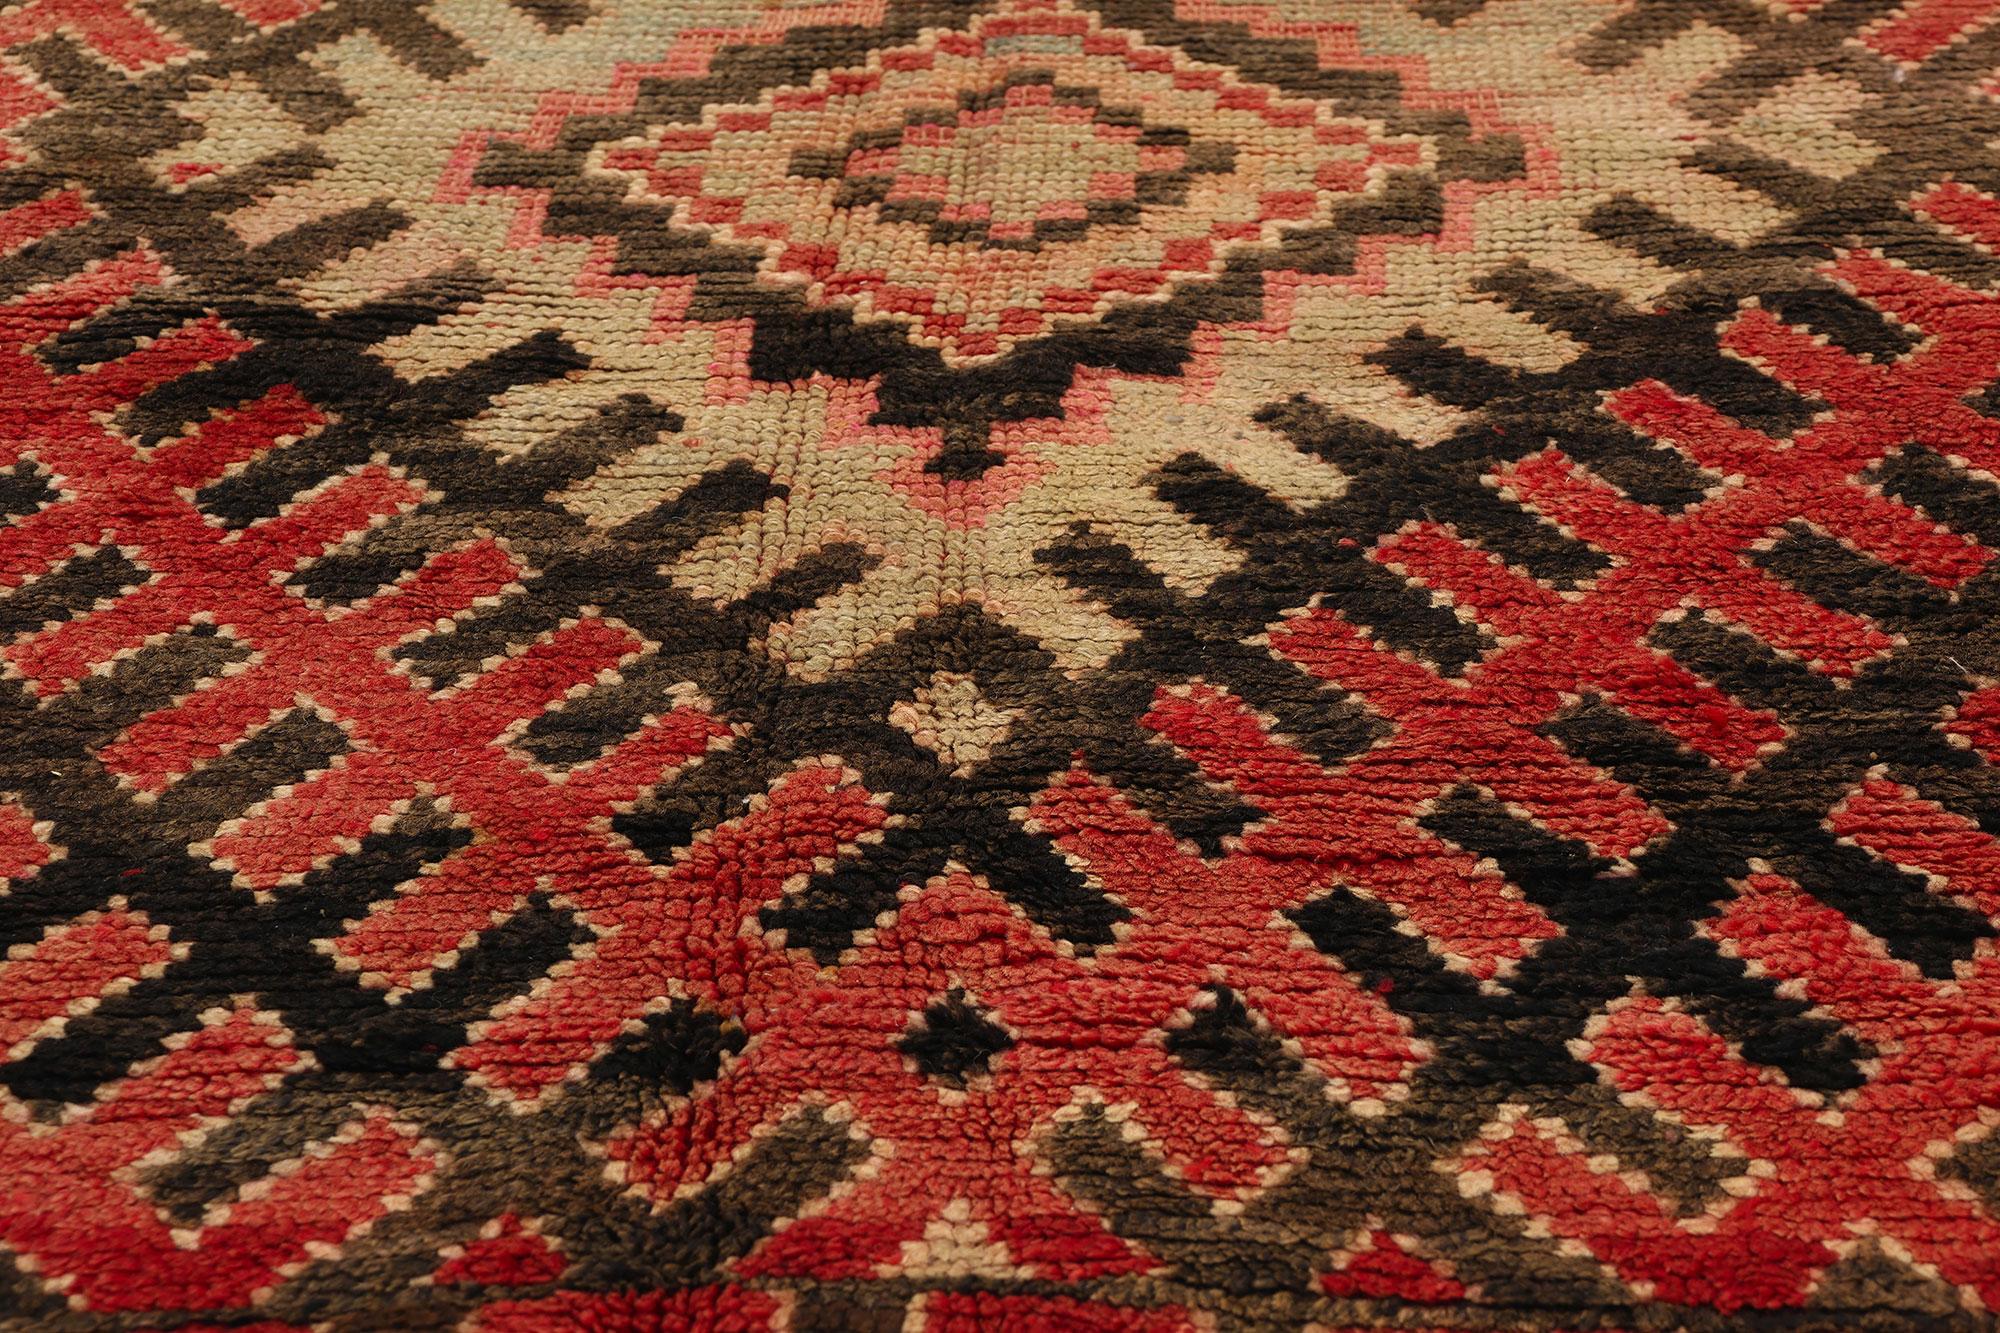 Vintage Talsint Moroccan Rug, Midcentury Modern Meets Tribal Enchantment In Good Condition For Sale In Dallas, TX